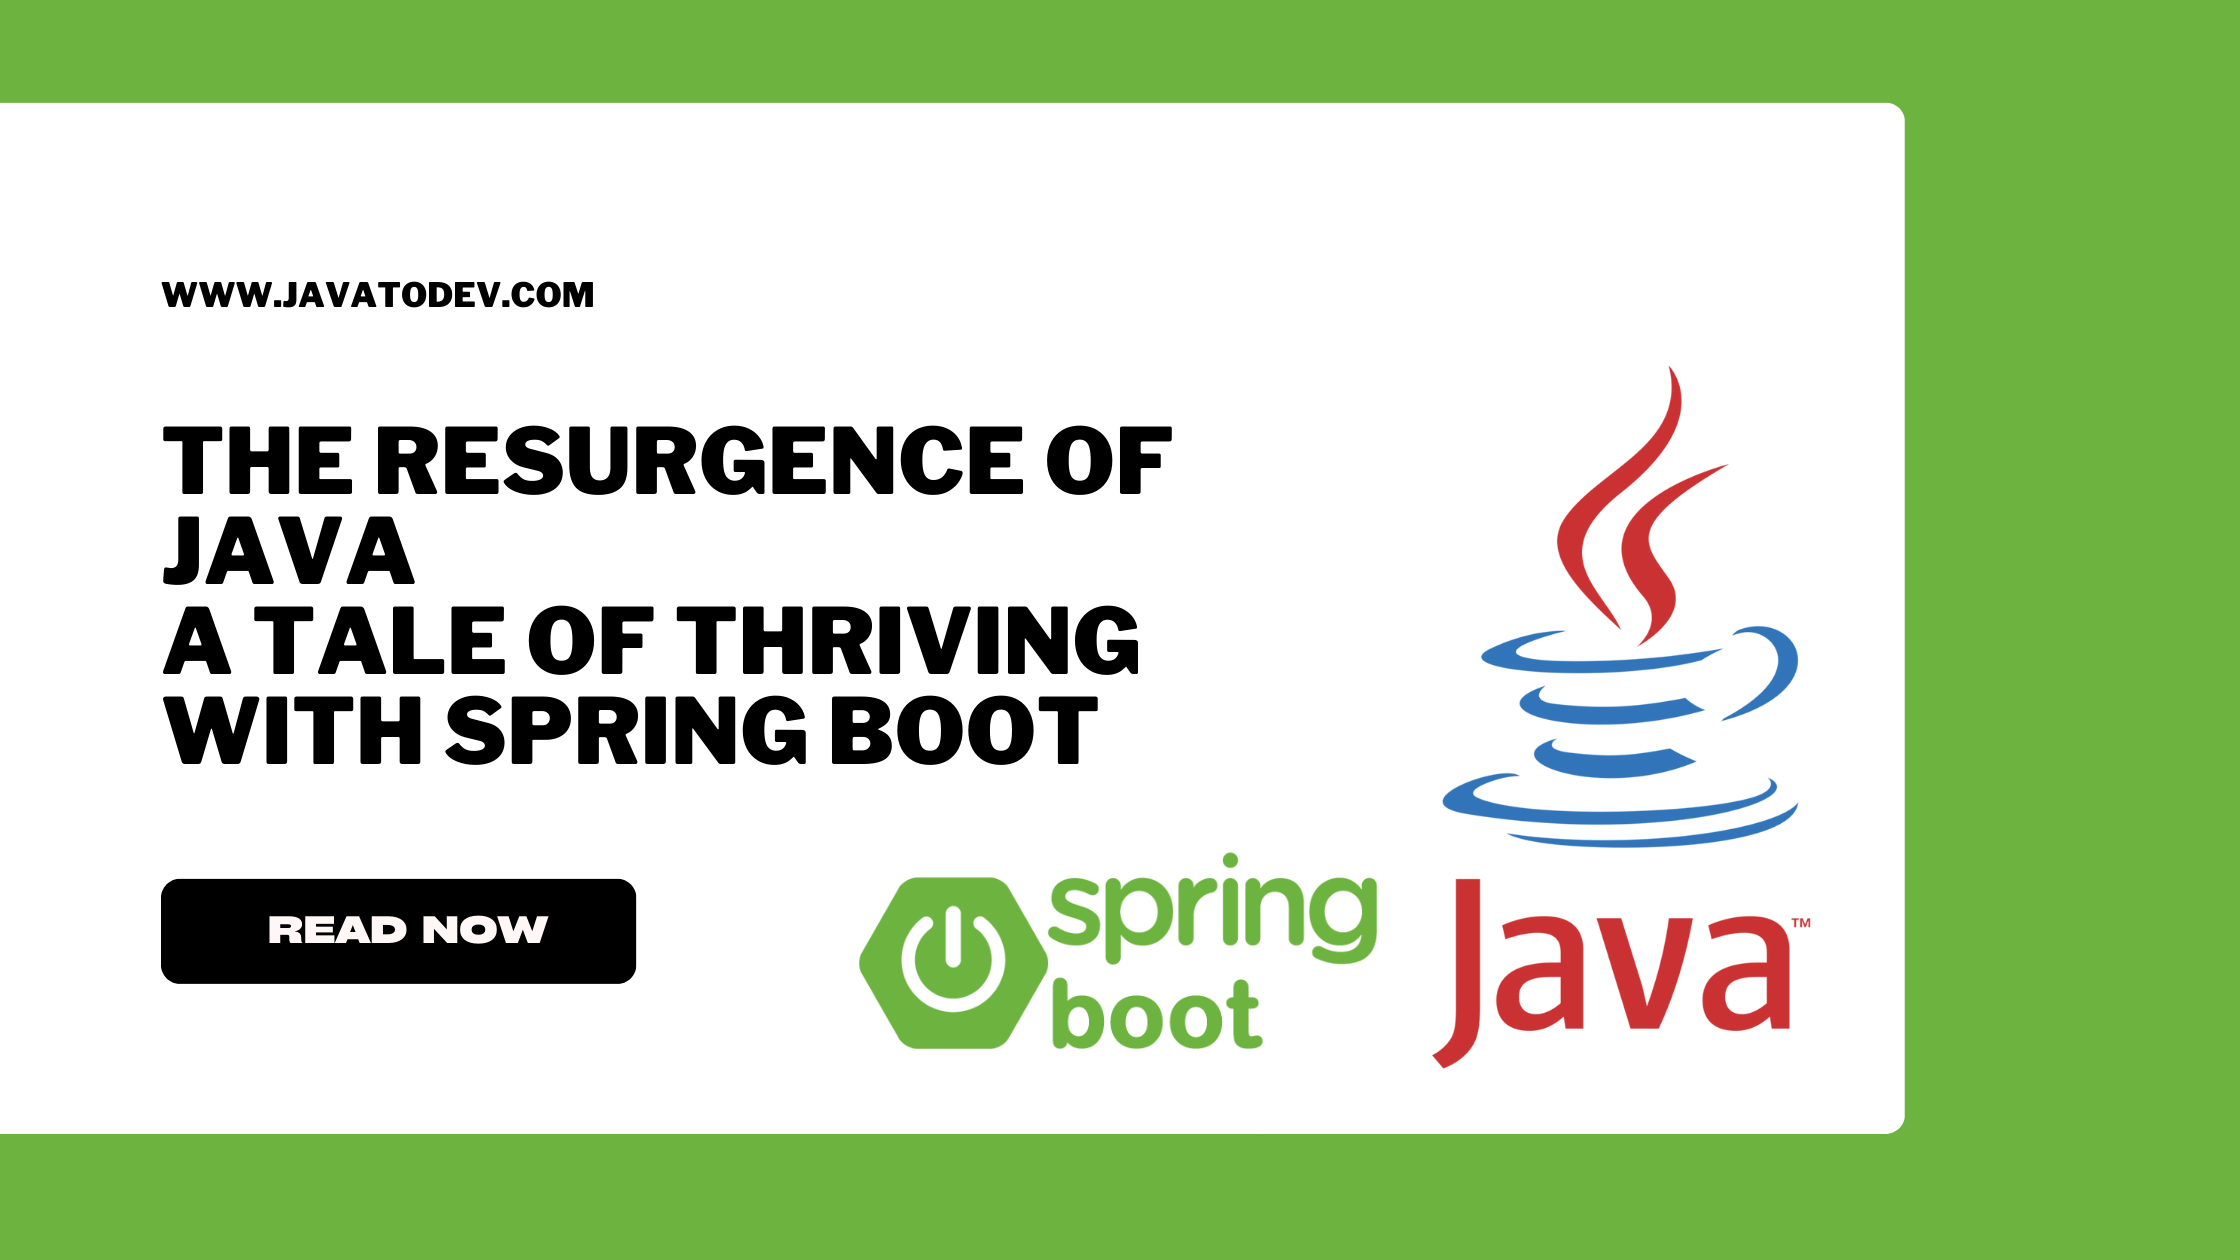 The Resurgence of Java: A Tale of Thriving with Spring Boot